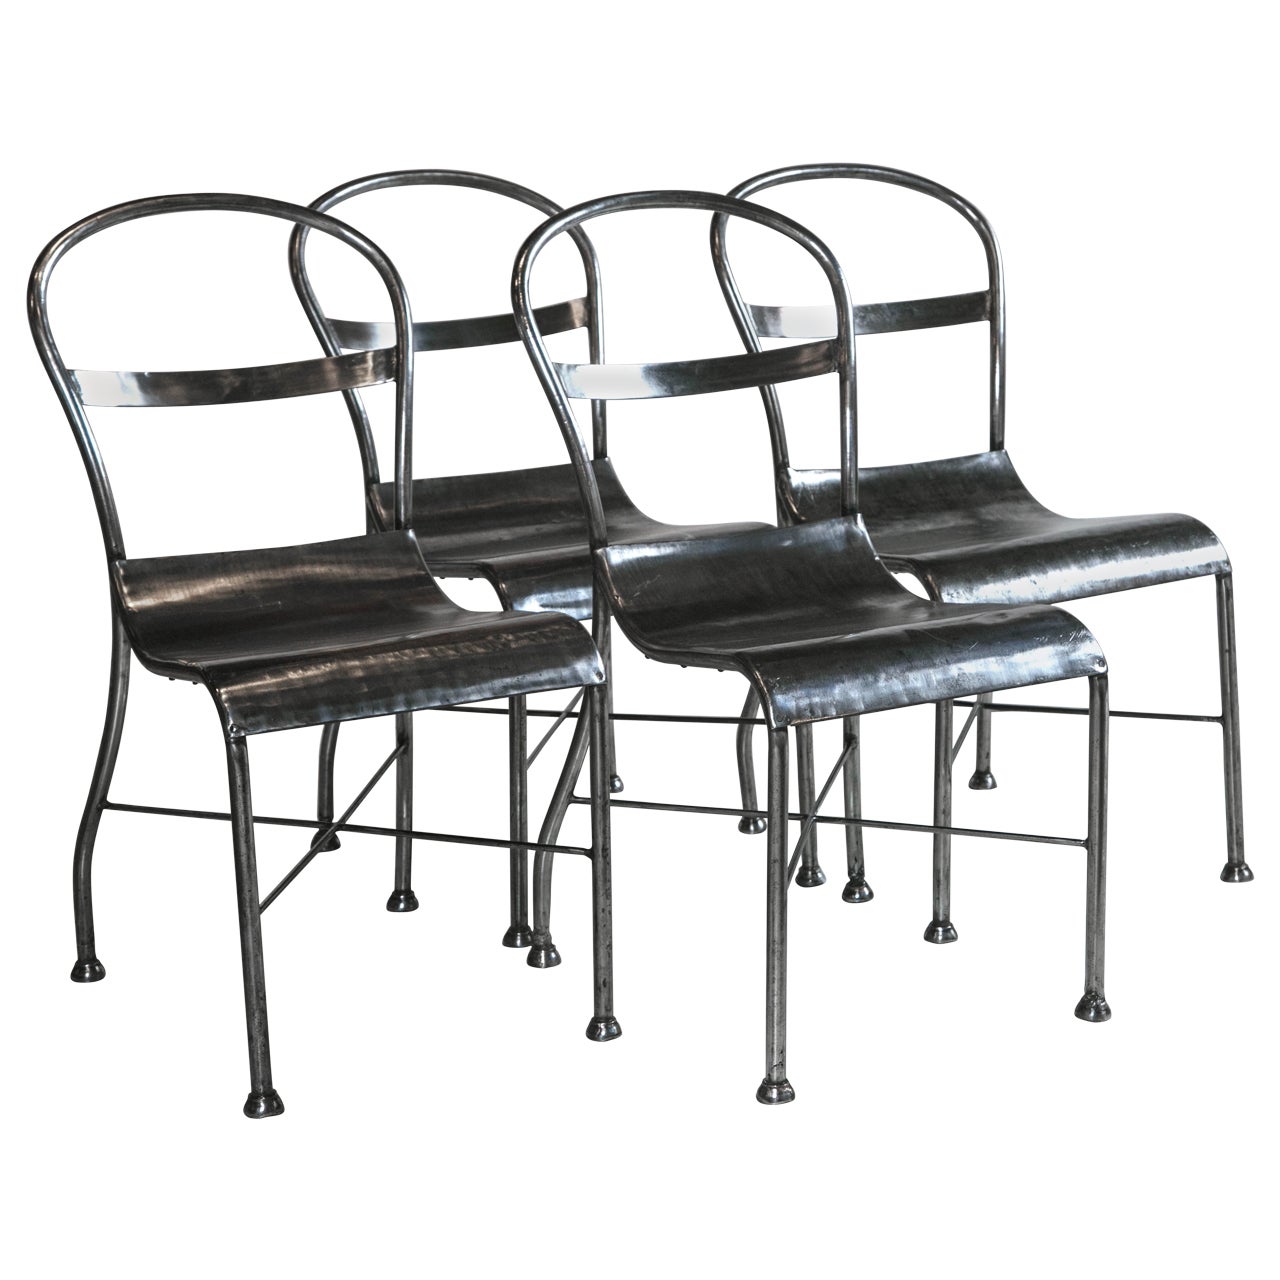 Rare Set of Four French Steel Cafe Chairs